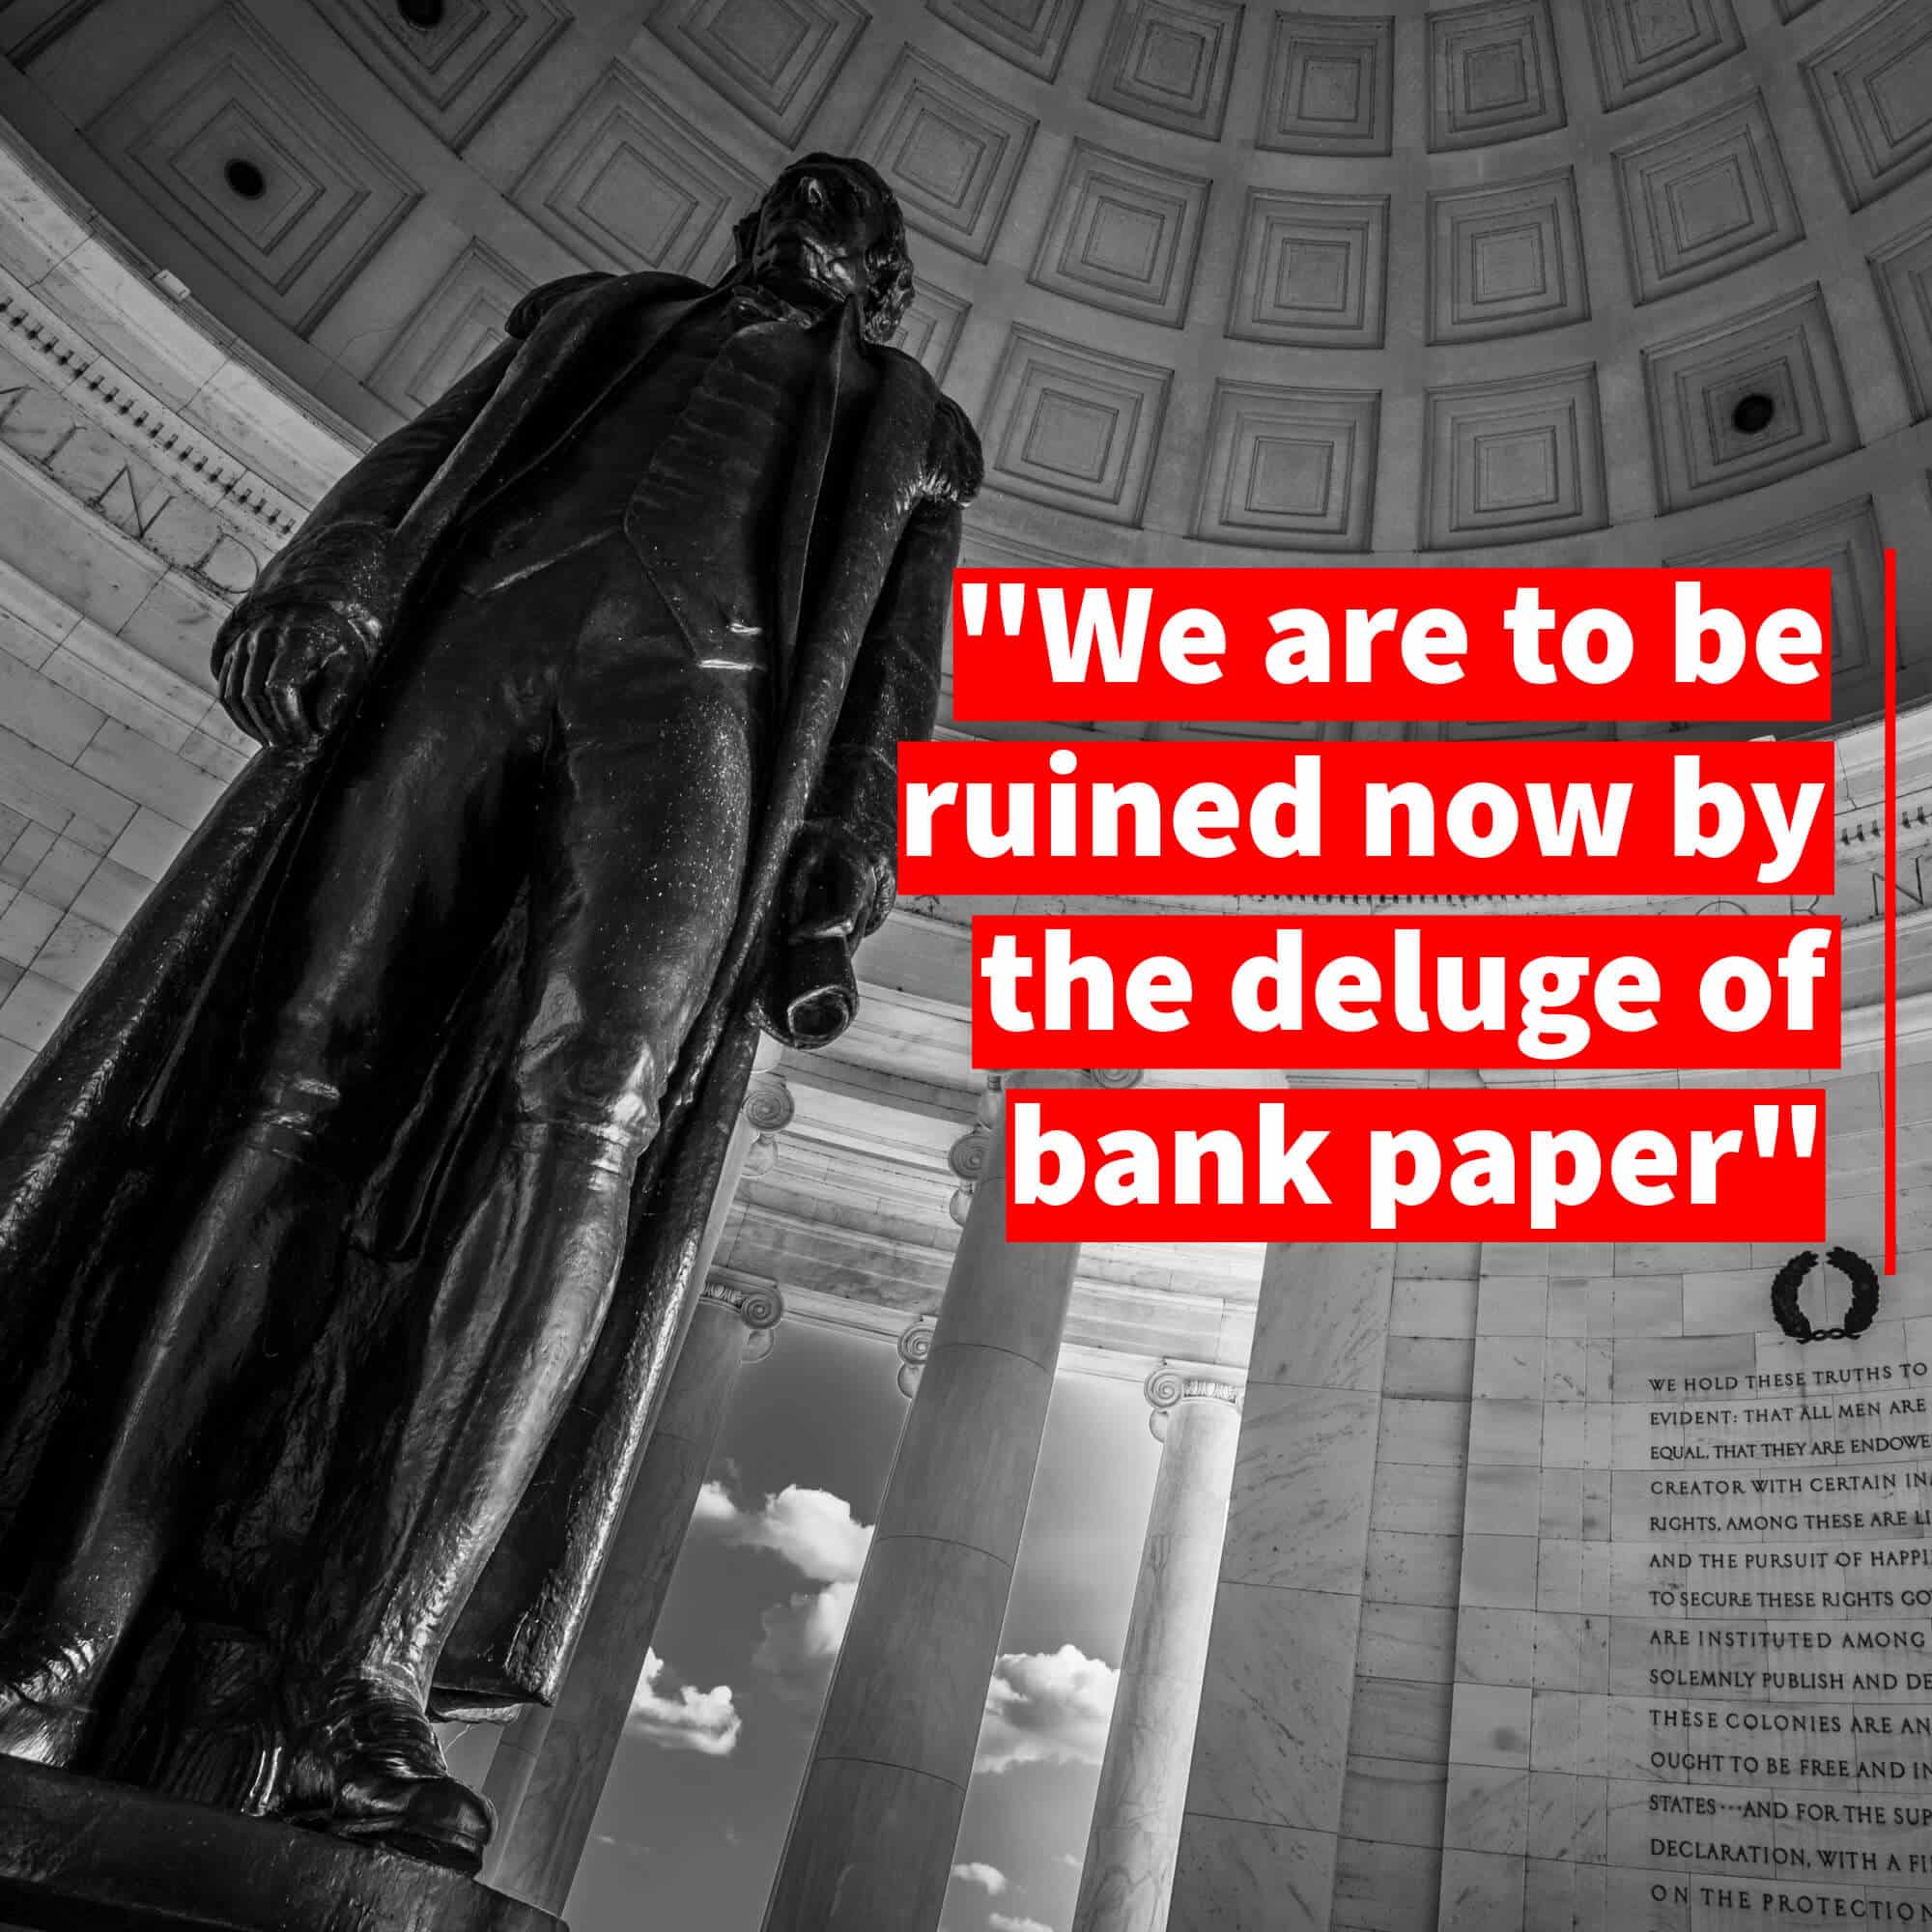 Thomas Jefferson’s Prediction of Economic Meltdown and Its Relevance Today